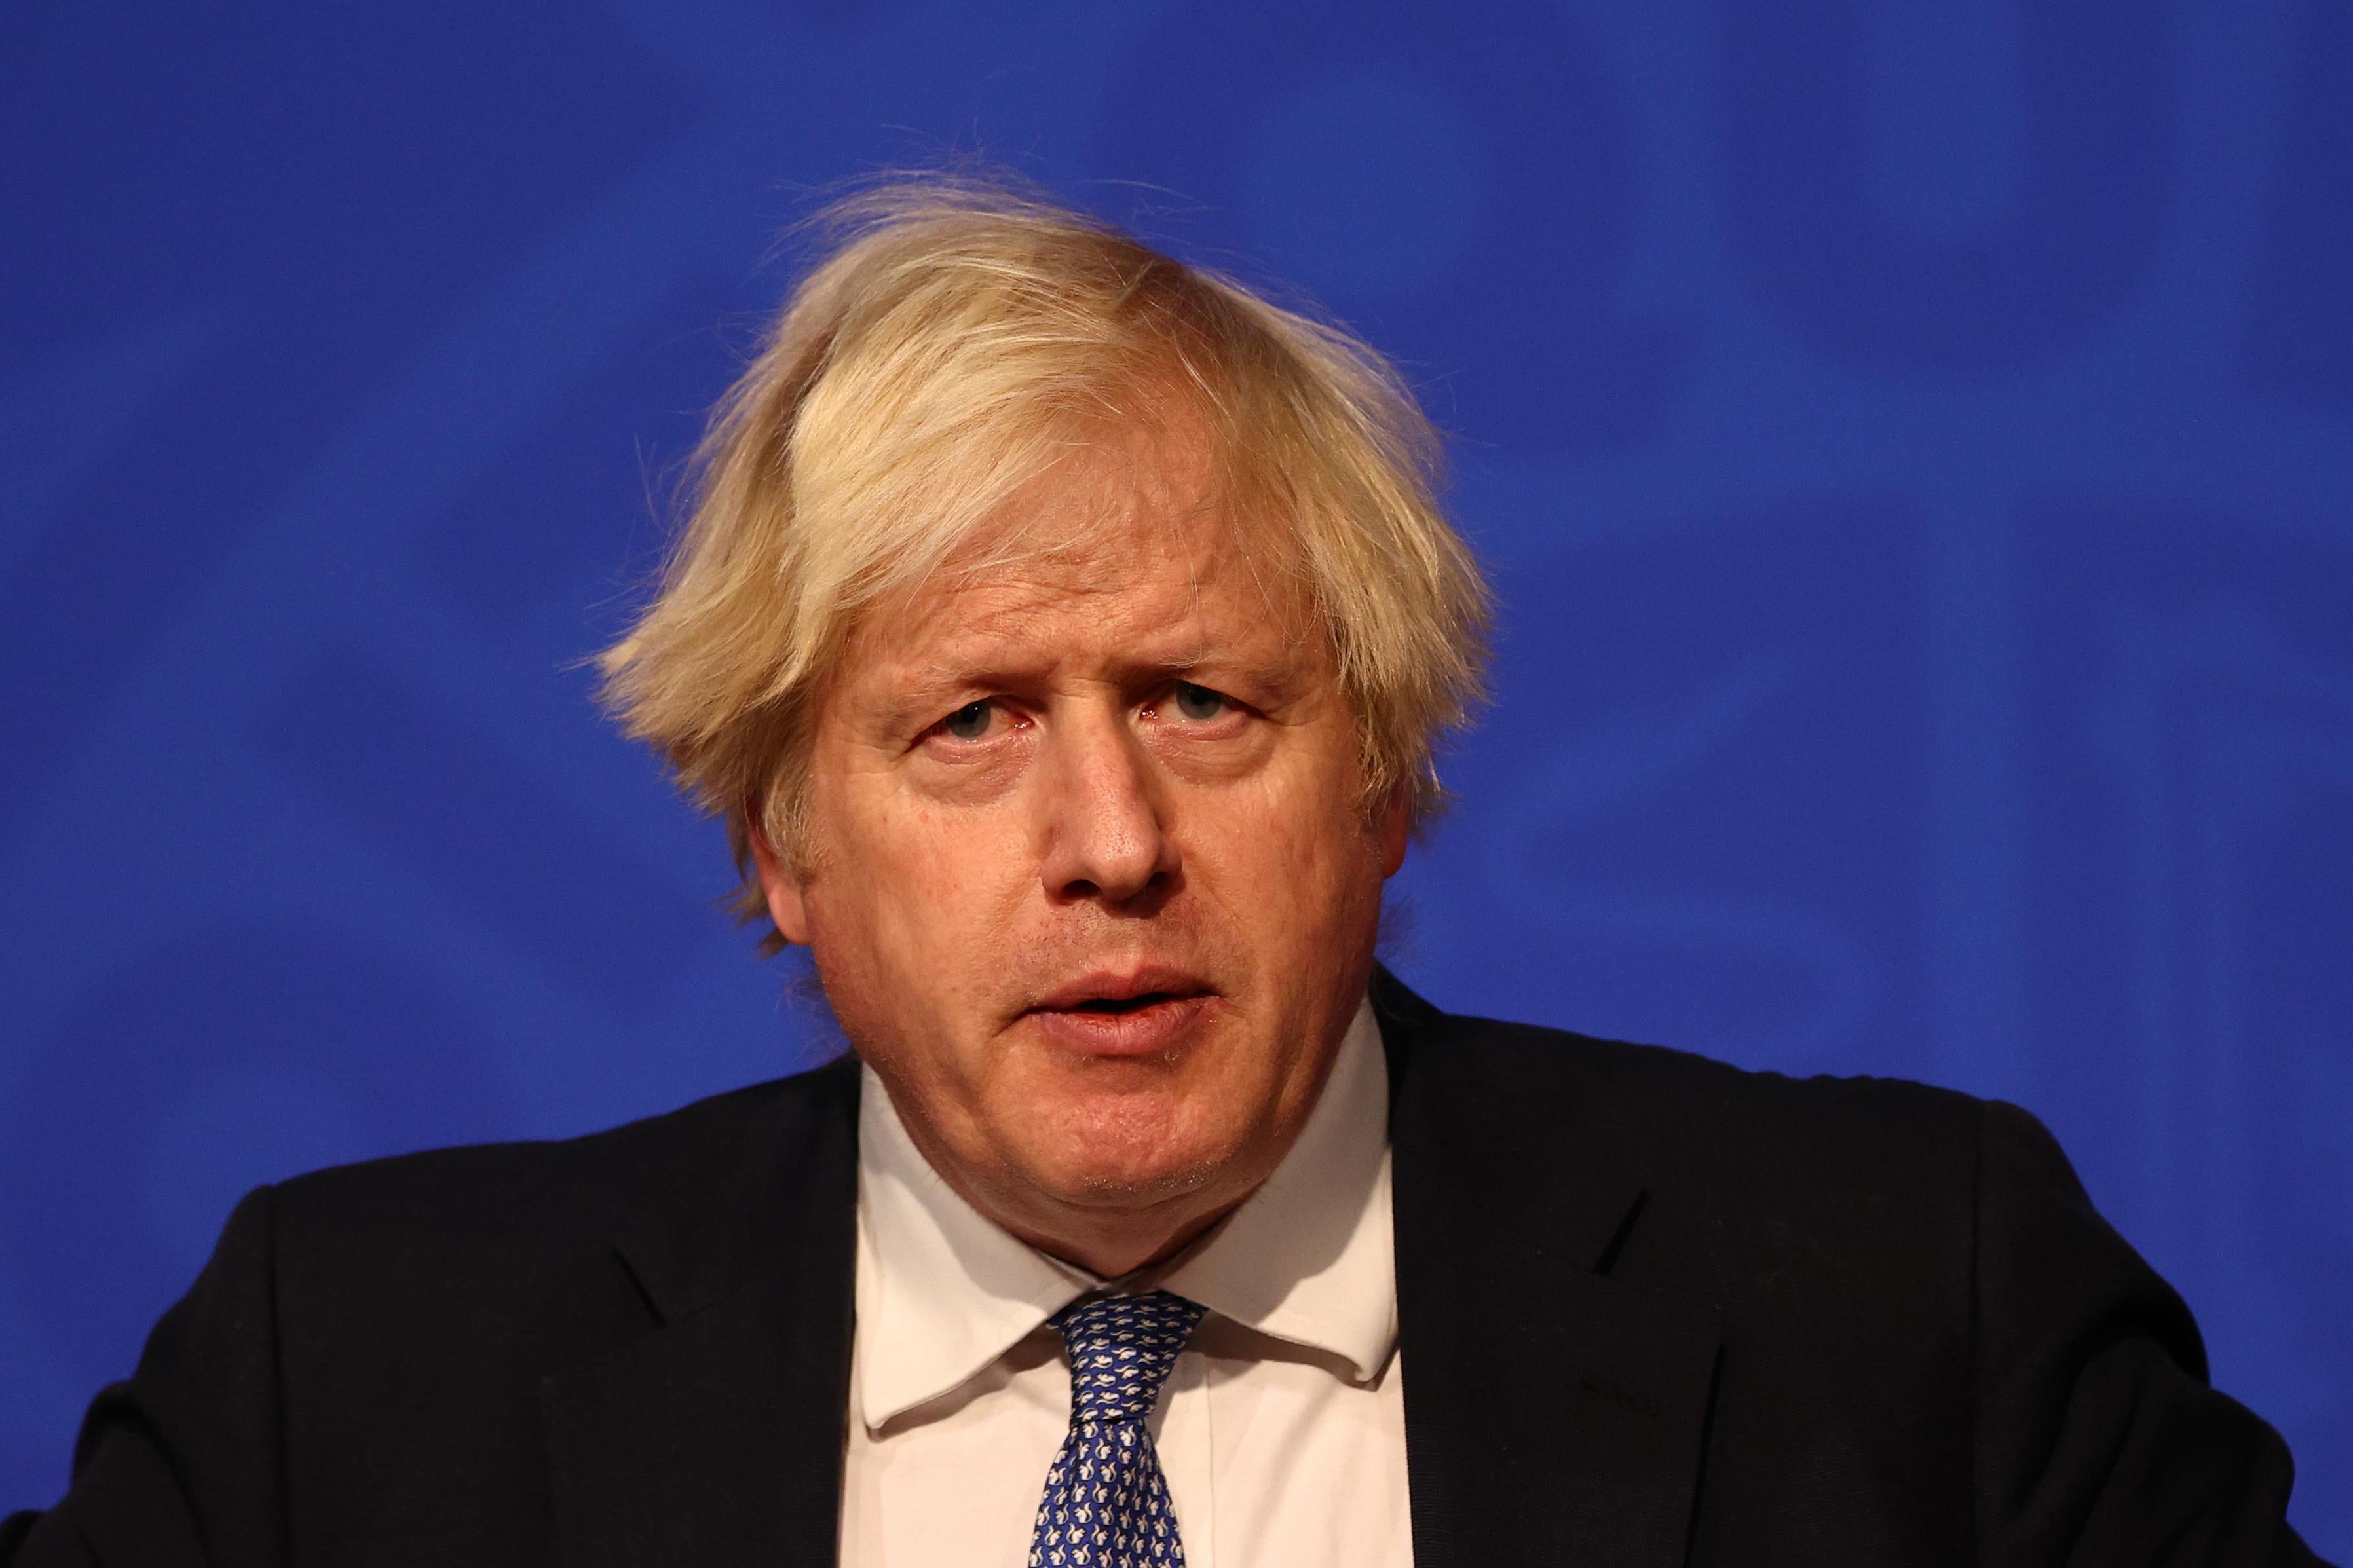 British Prime Minister Boris Johnson gives a news conference at 10 Downing Street on December 8, 2021 in London, England. 